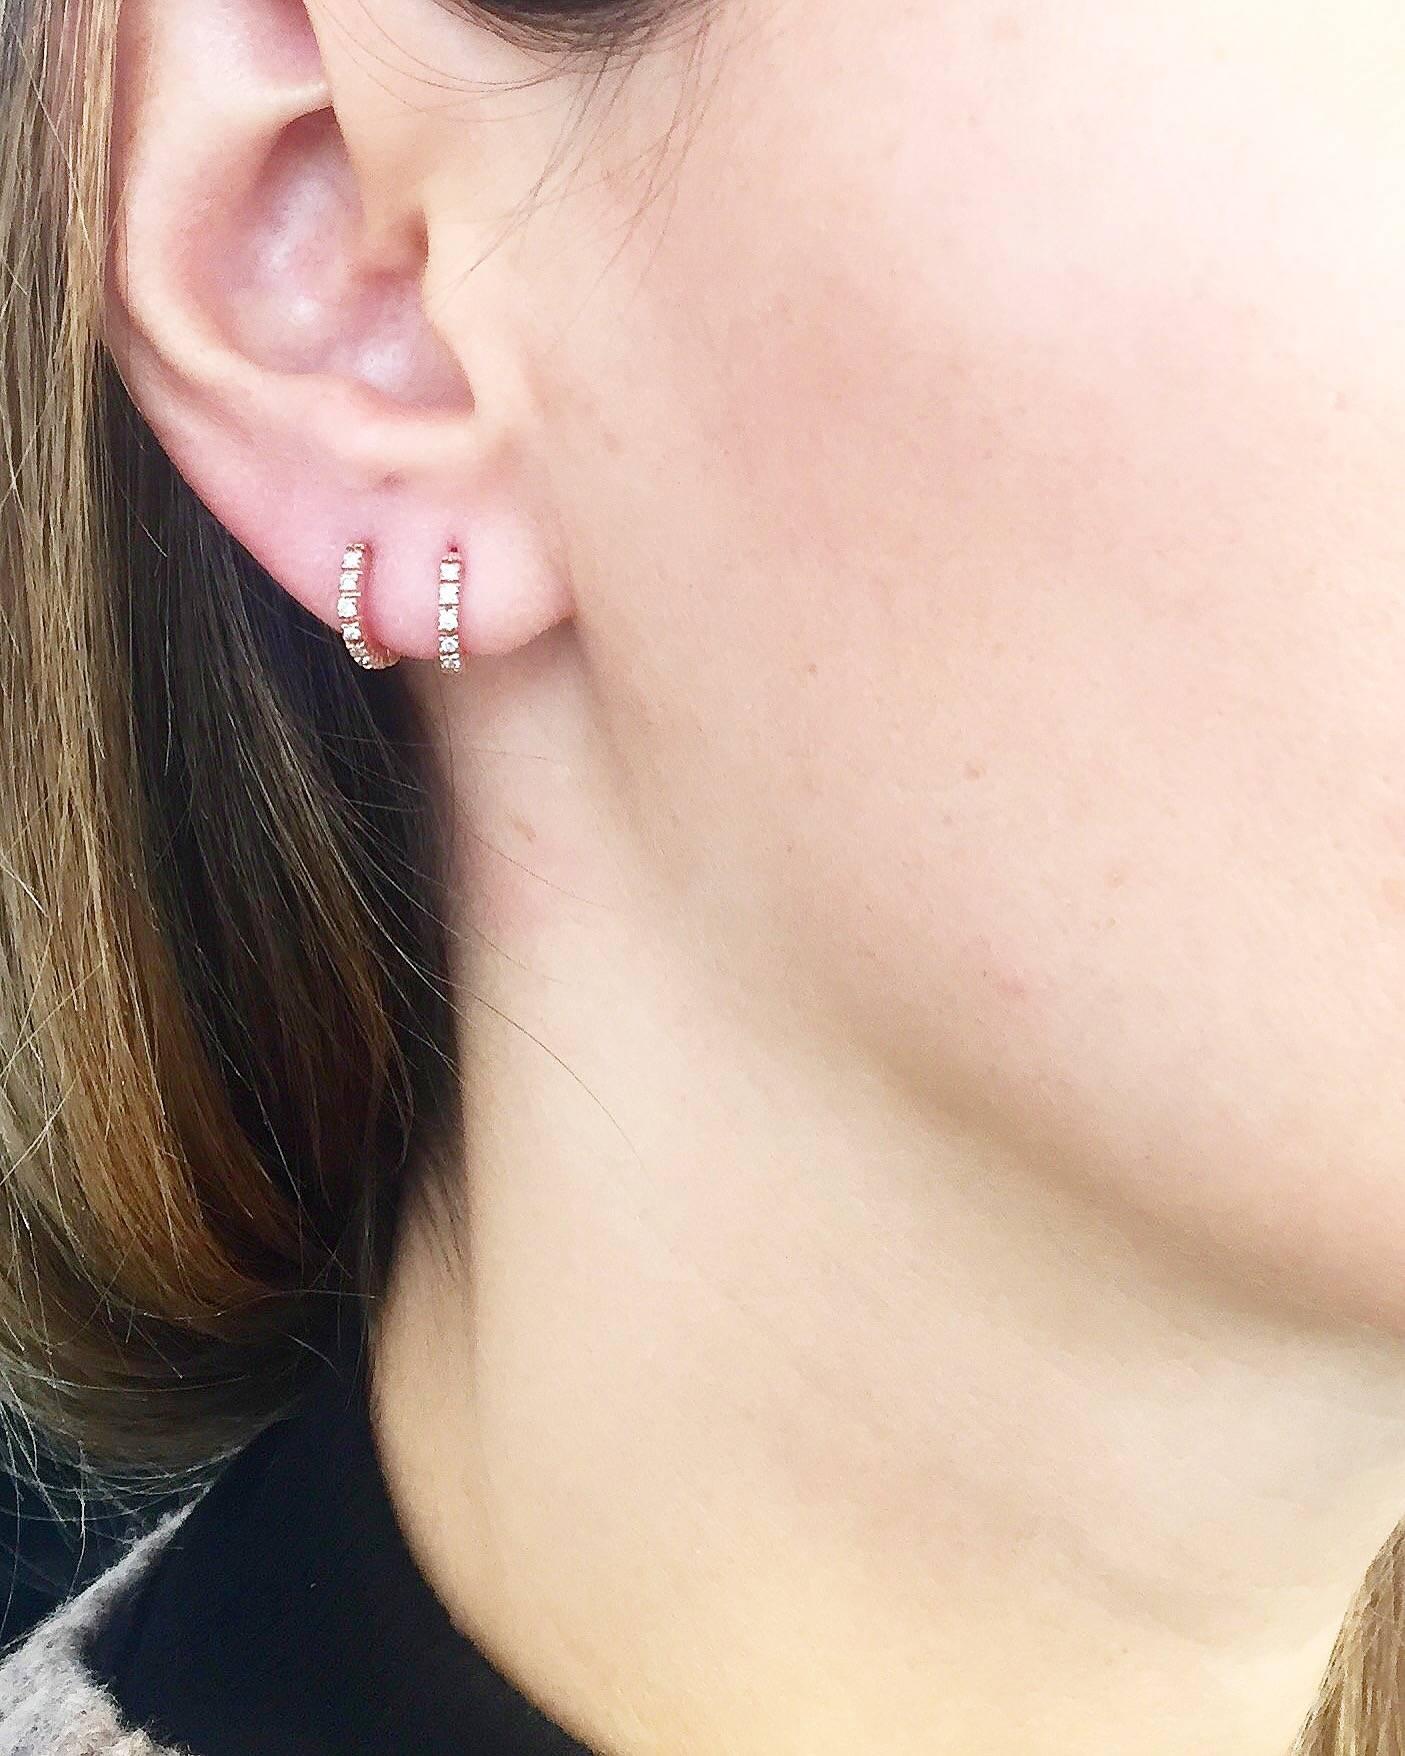 These hoop earrings are made in Italy of 18k rose gold and embellished with 0.10-carats of sparkling round brilliant cut diamonds. The delicate size makes them perfect for every day.

This earrings are from our own production, possibility to custom